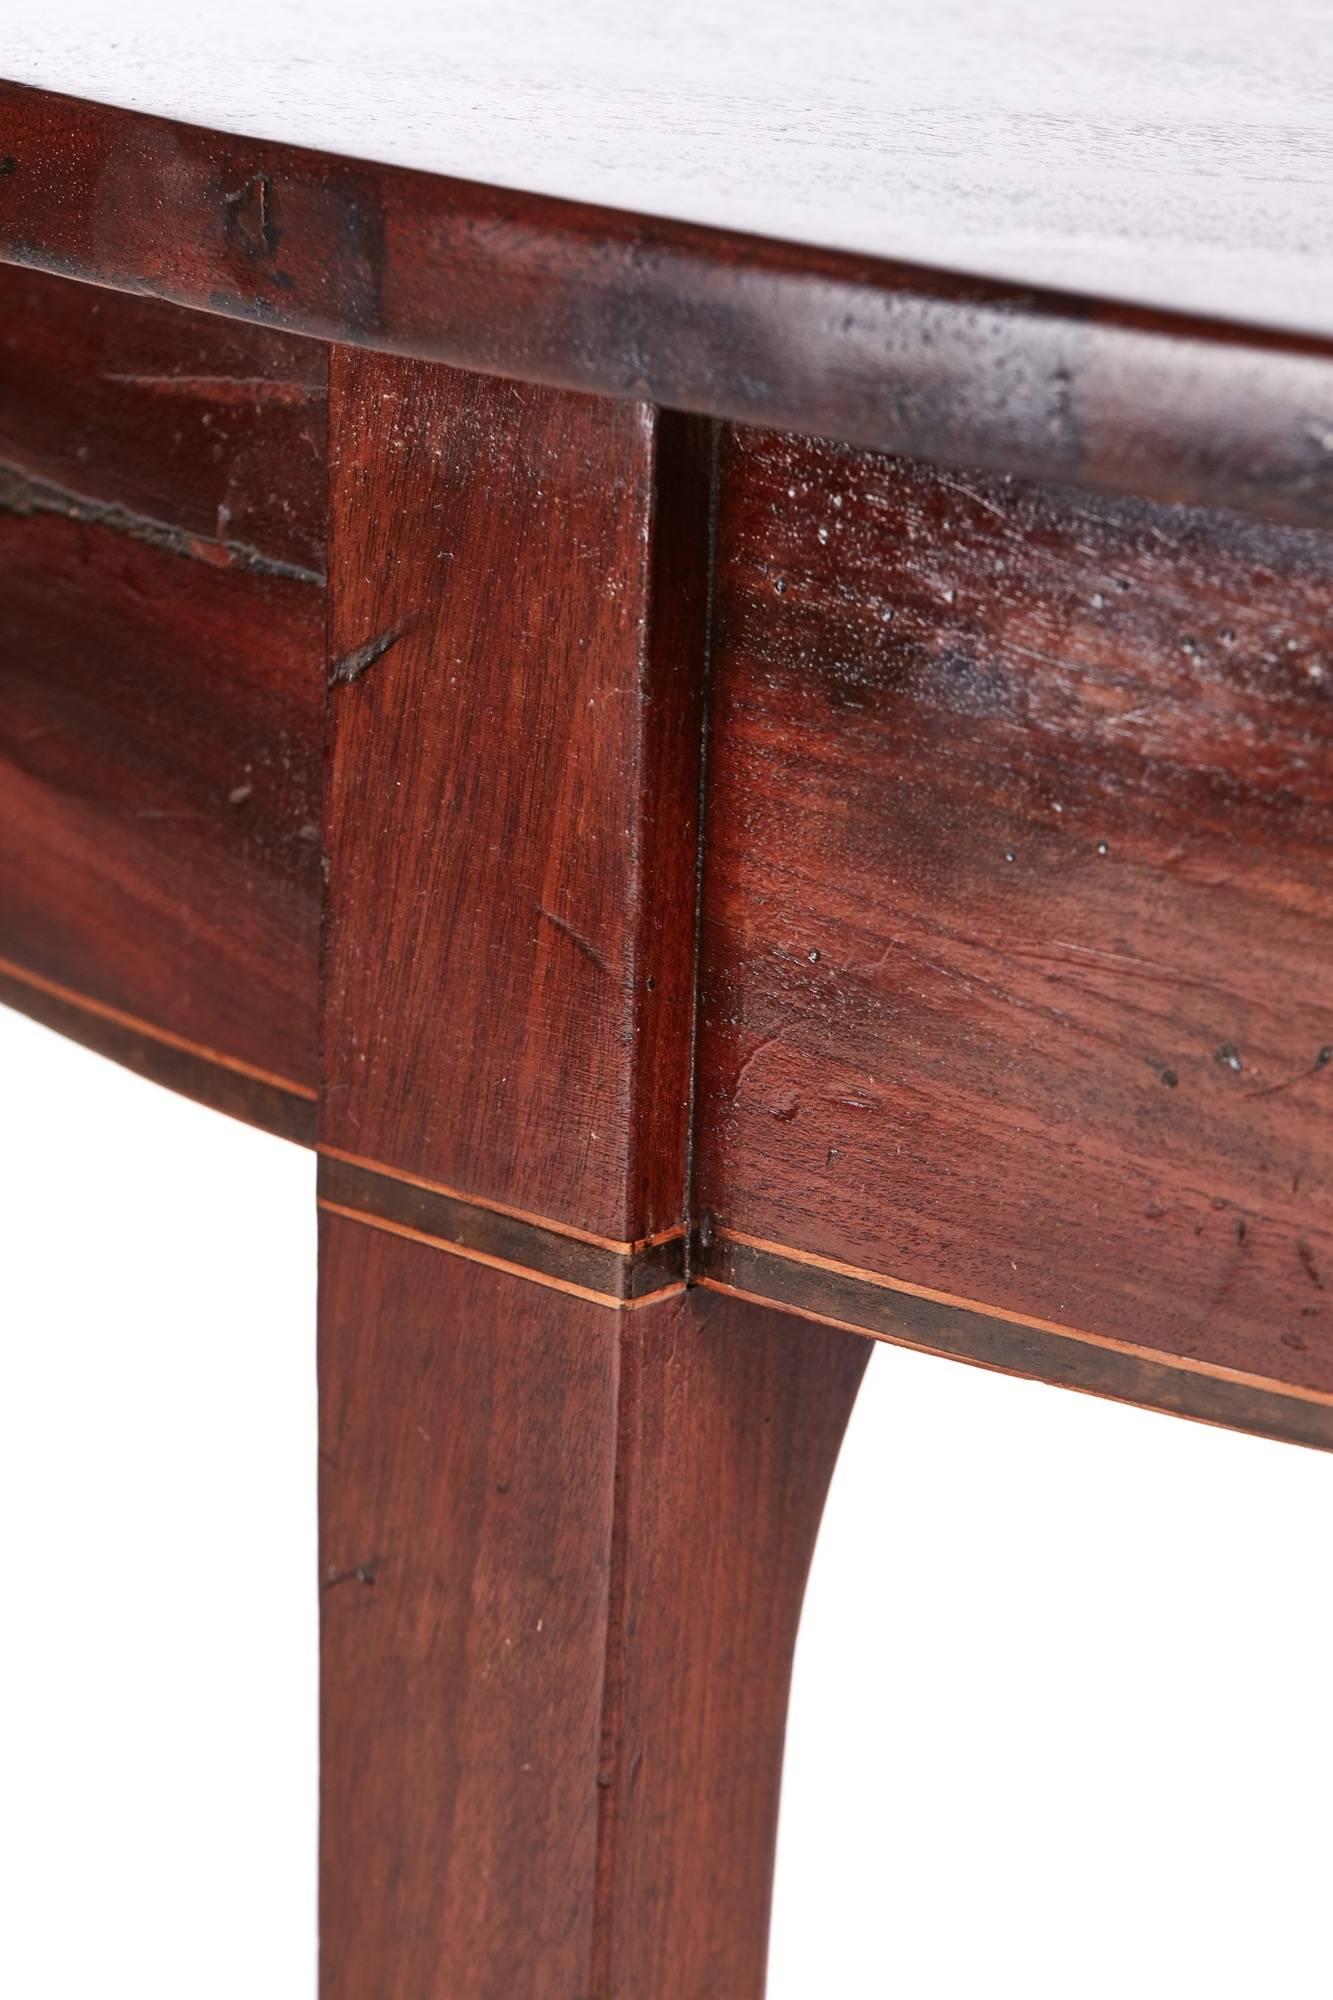 Georgian mahogany demilune console table with a lovely quality mahogany top, shaped frieze with satinwood inlay, standing on four square tapering legs
Lovely color and condition
Measure: 44